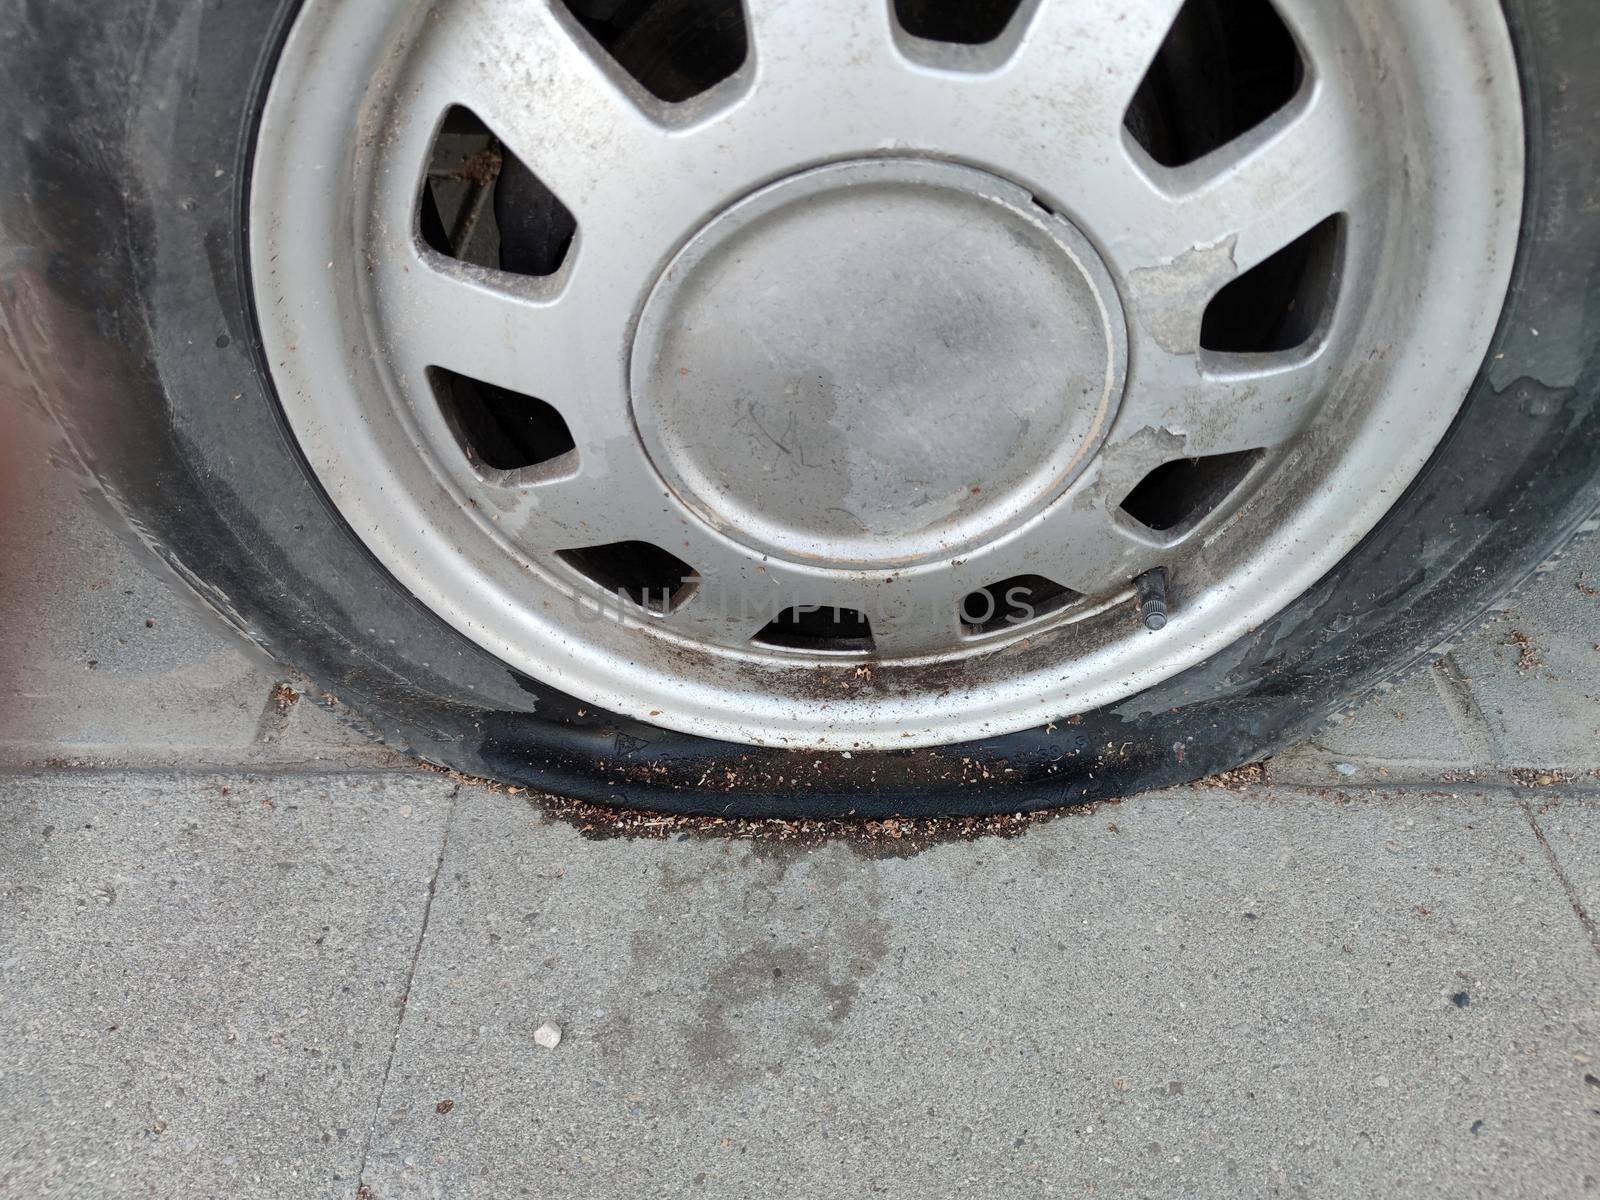 flat punctured car wheel after an accident close-up by Annado